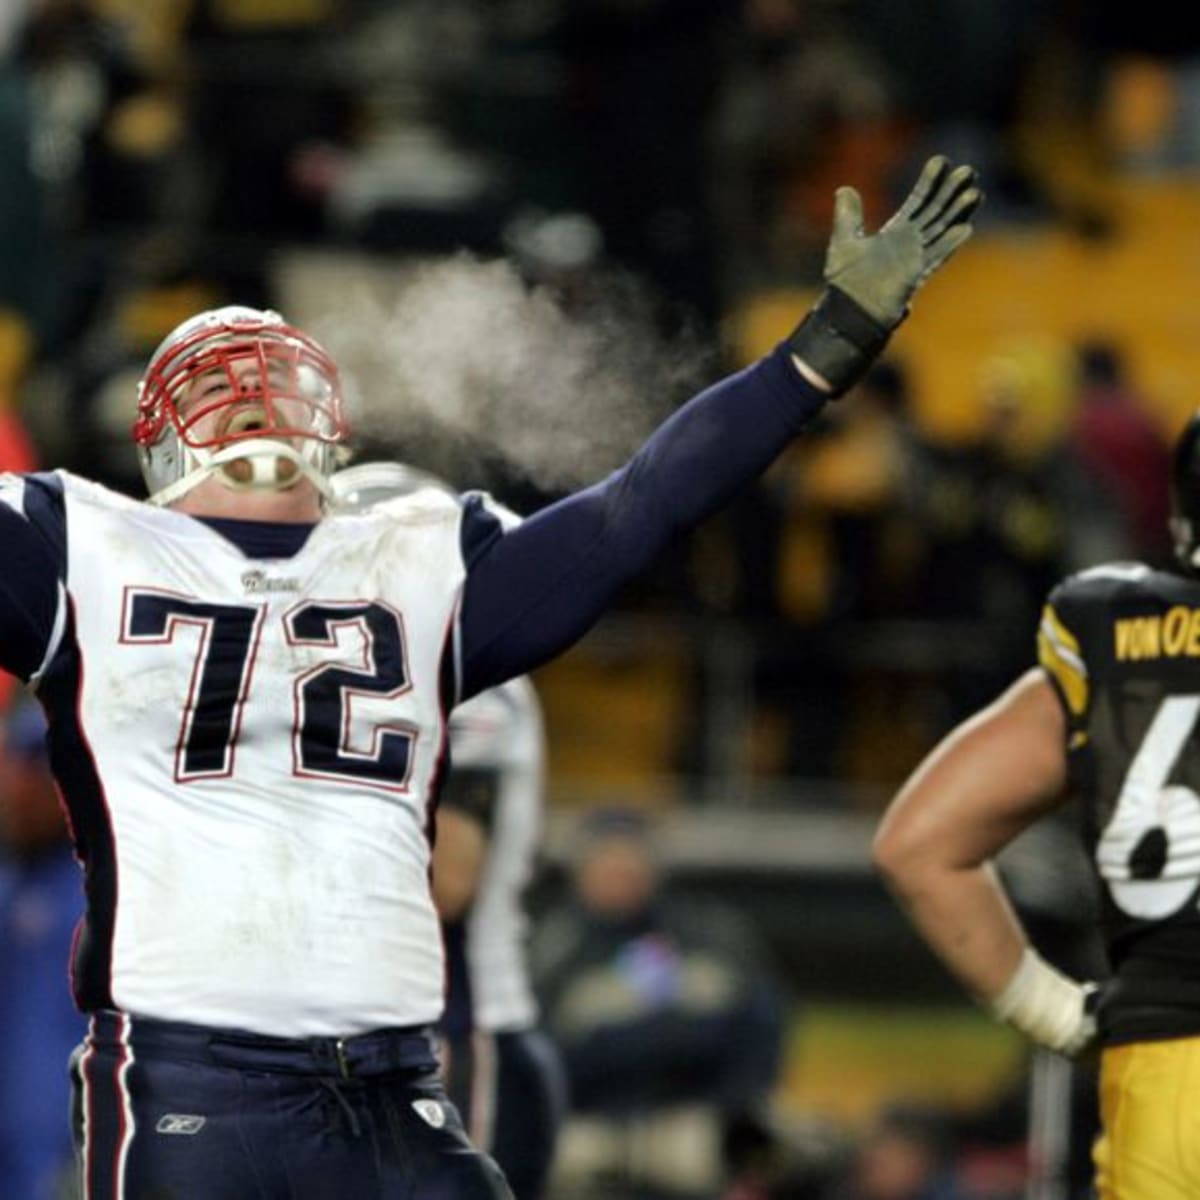 Steelers claim that Patriots cheated in 2004 AFC Championship